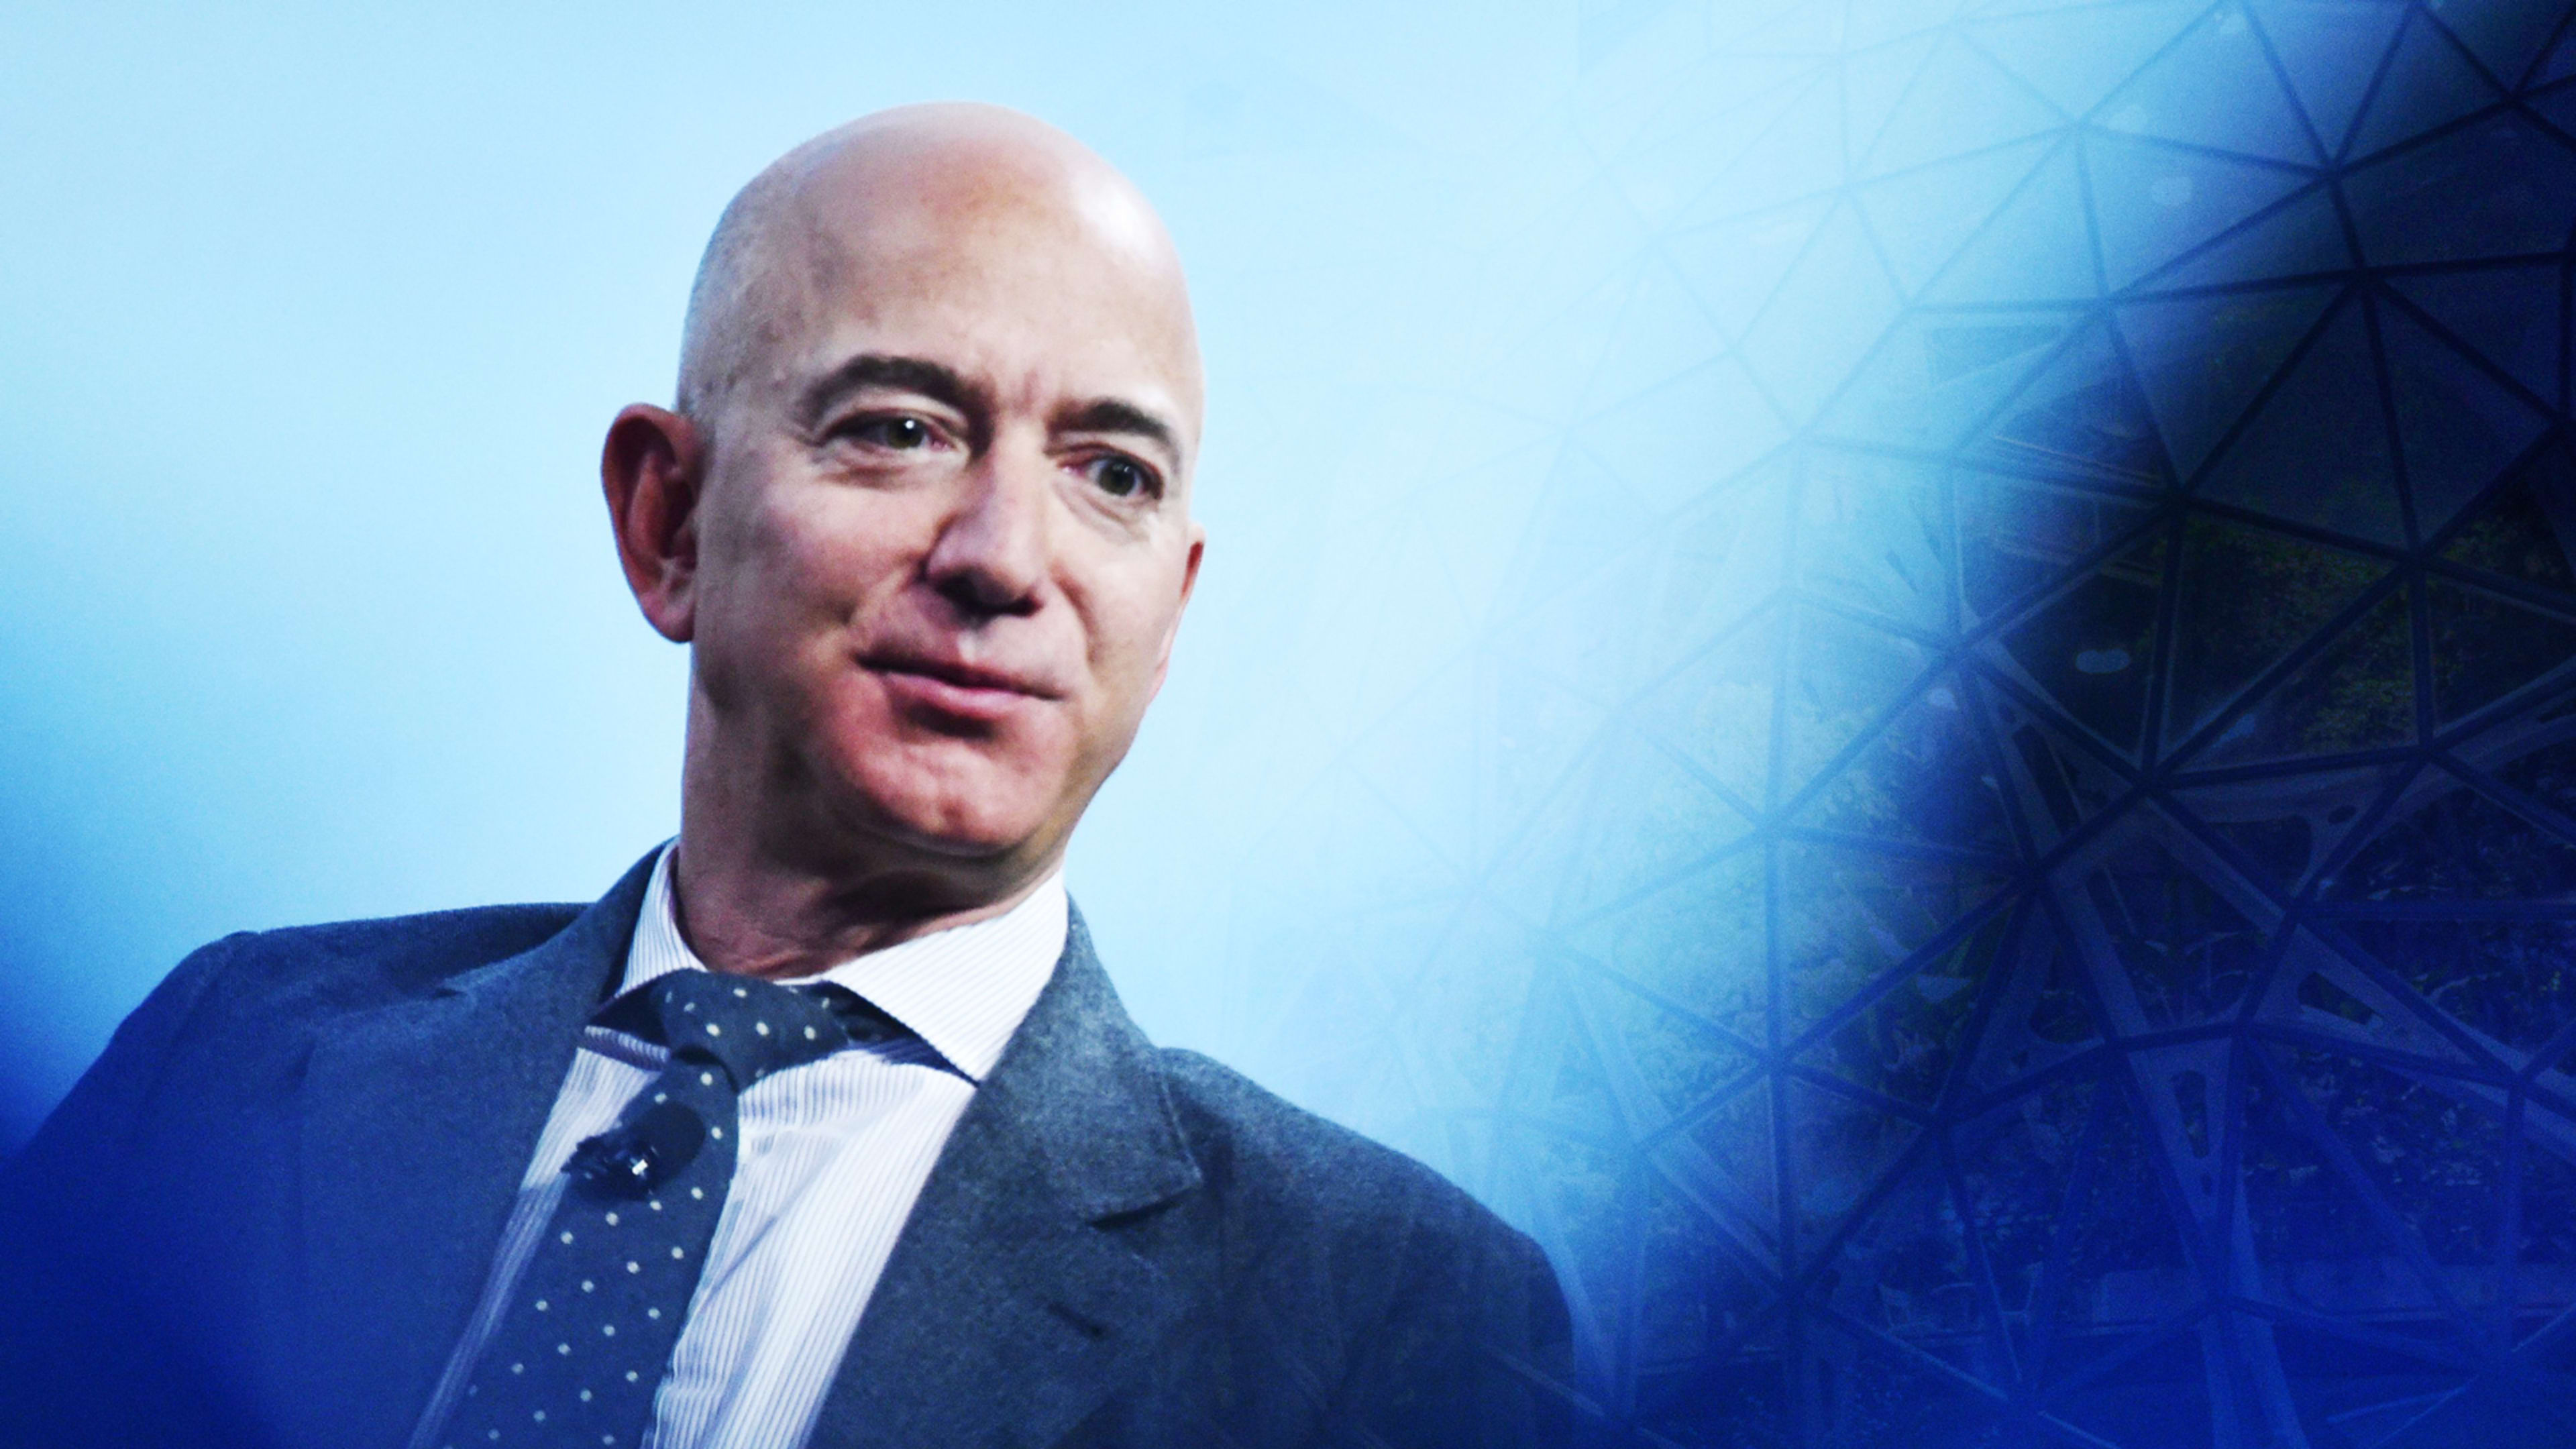 Why 2020 could be the year Amazon becomes unstoppable